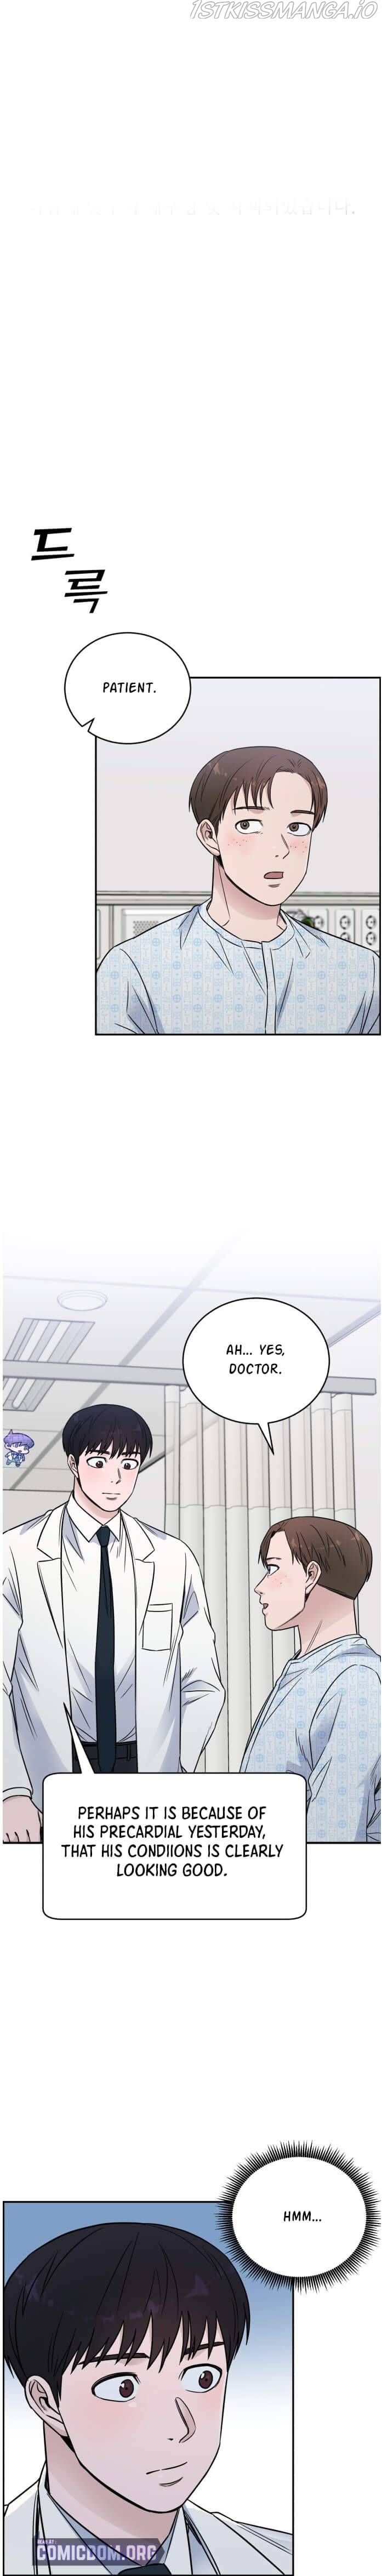 A.I. Doctor Chapter 55 - Page 2